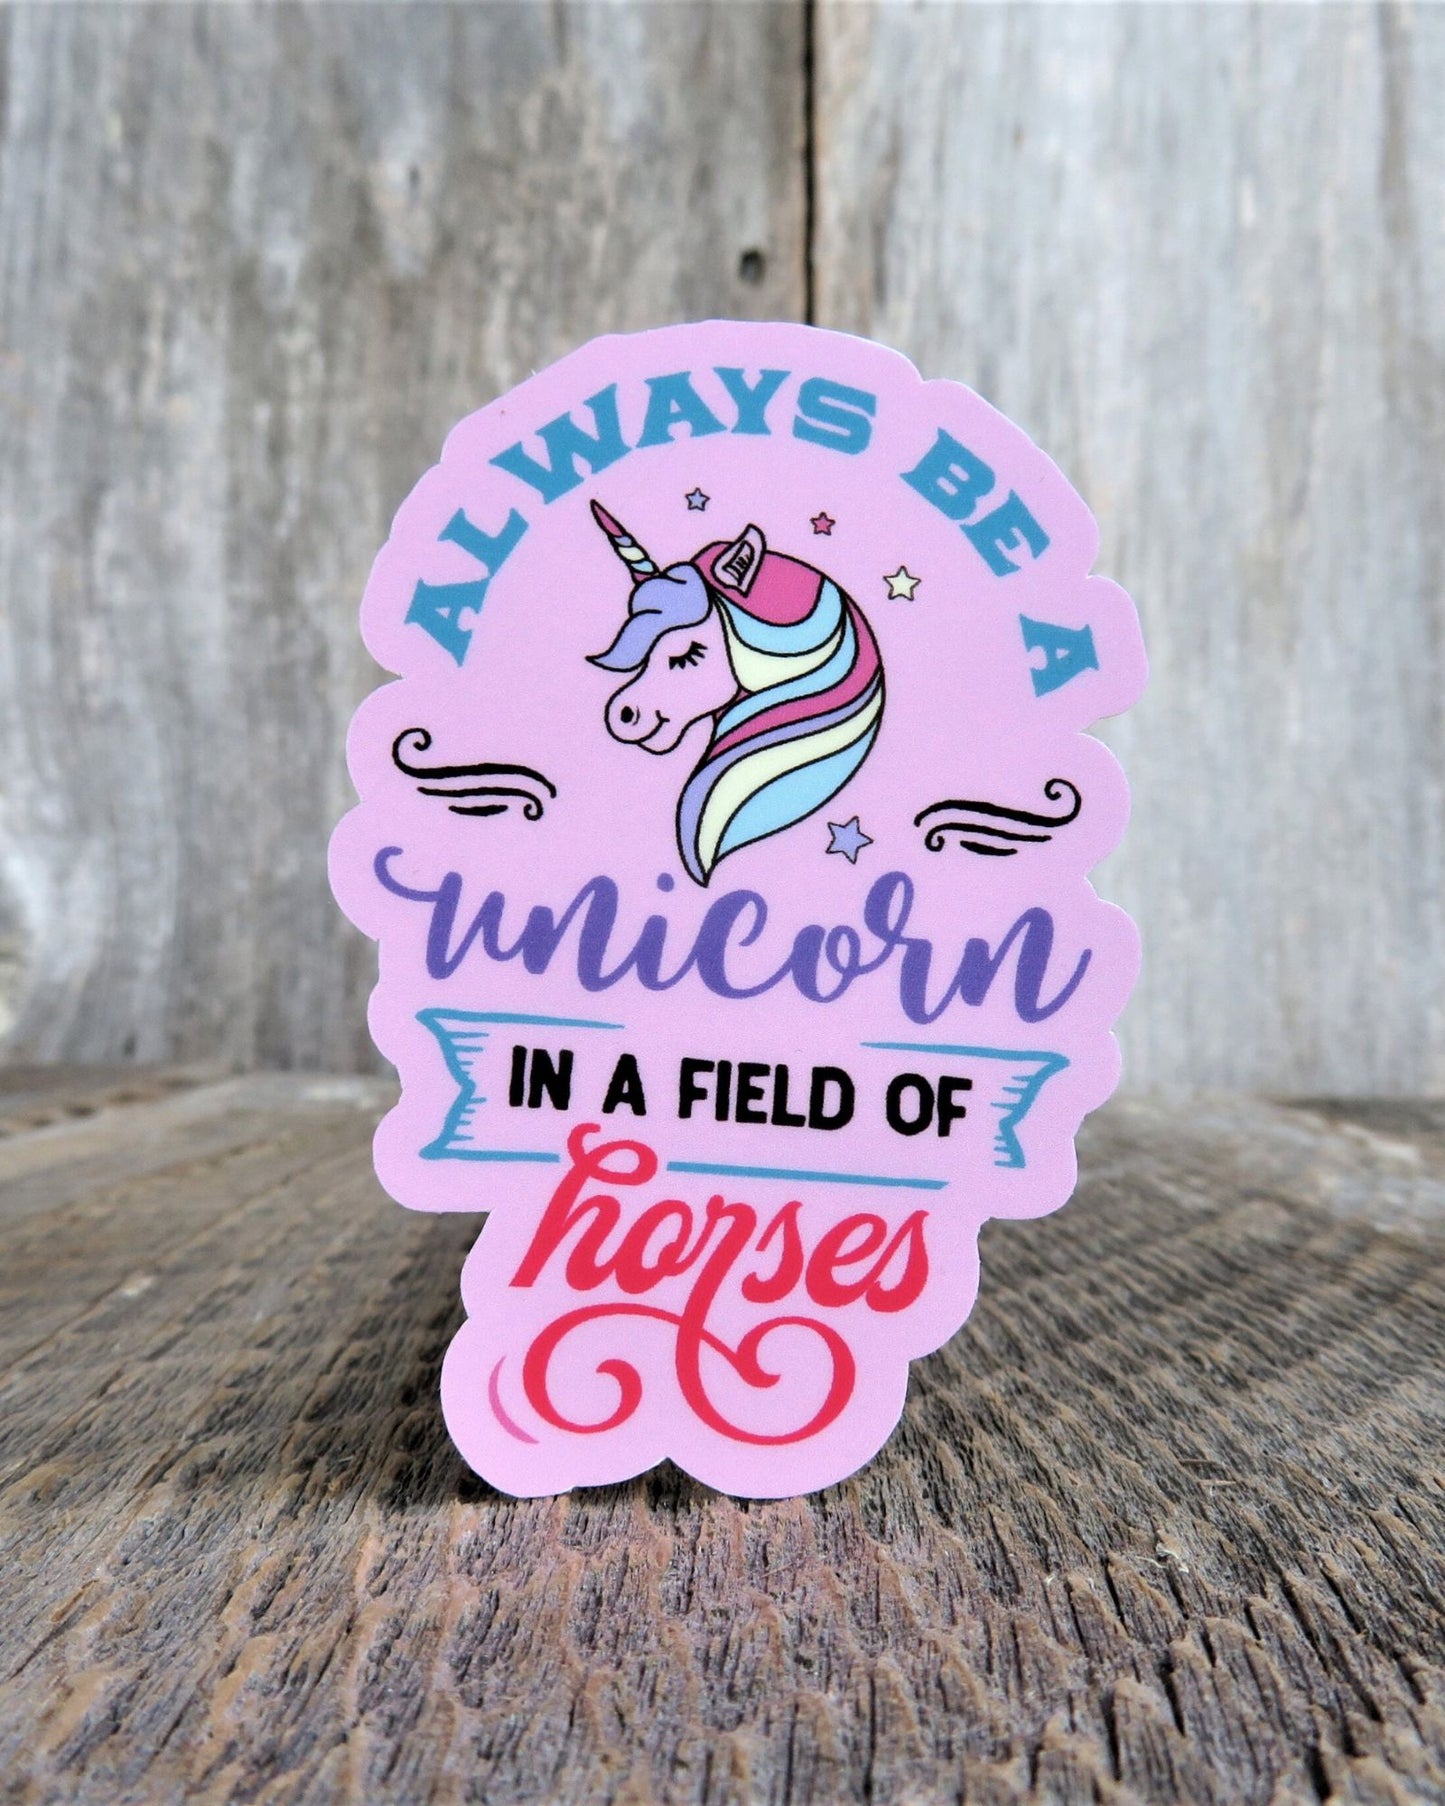 Always Be A Unicorn In a Field of Horses Sticker Positive Saying Stand Out Be Yourself Waterproof Laptop Sticker